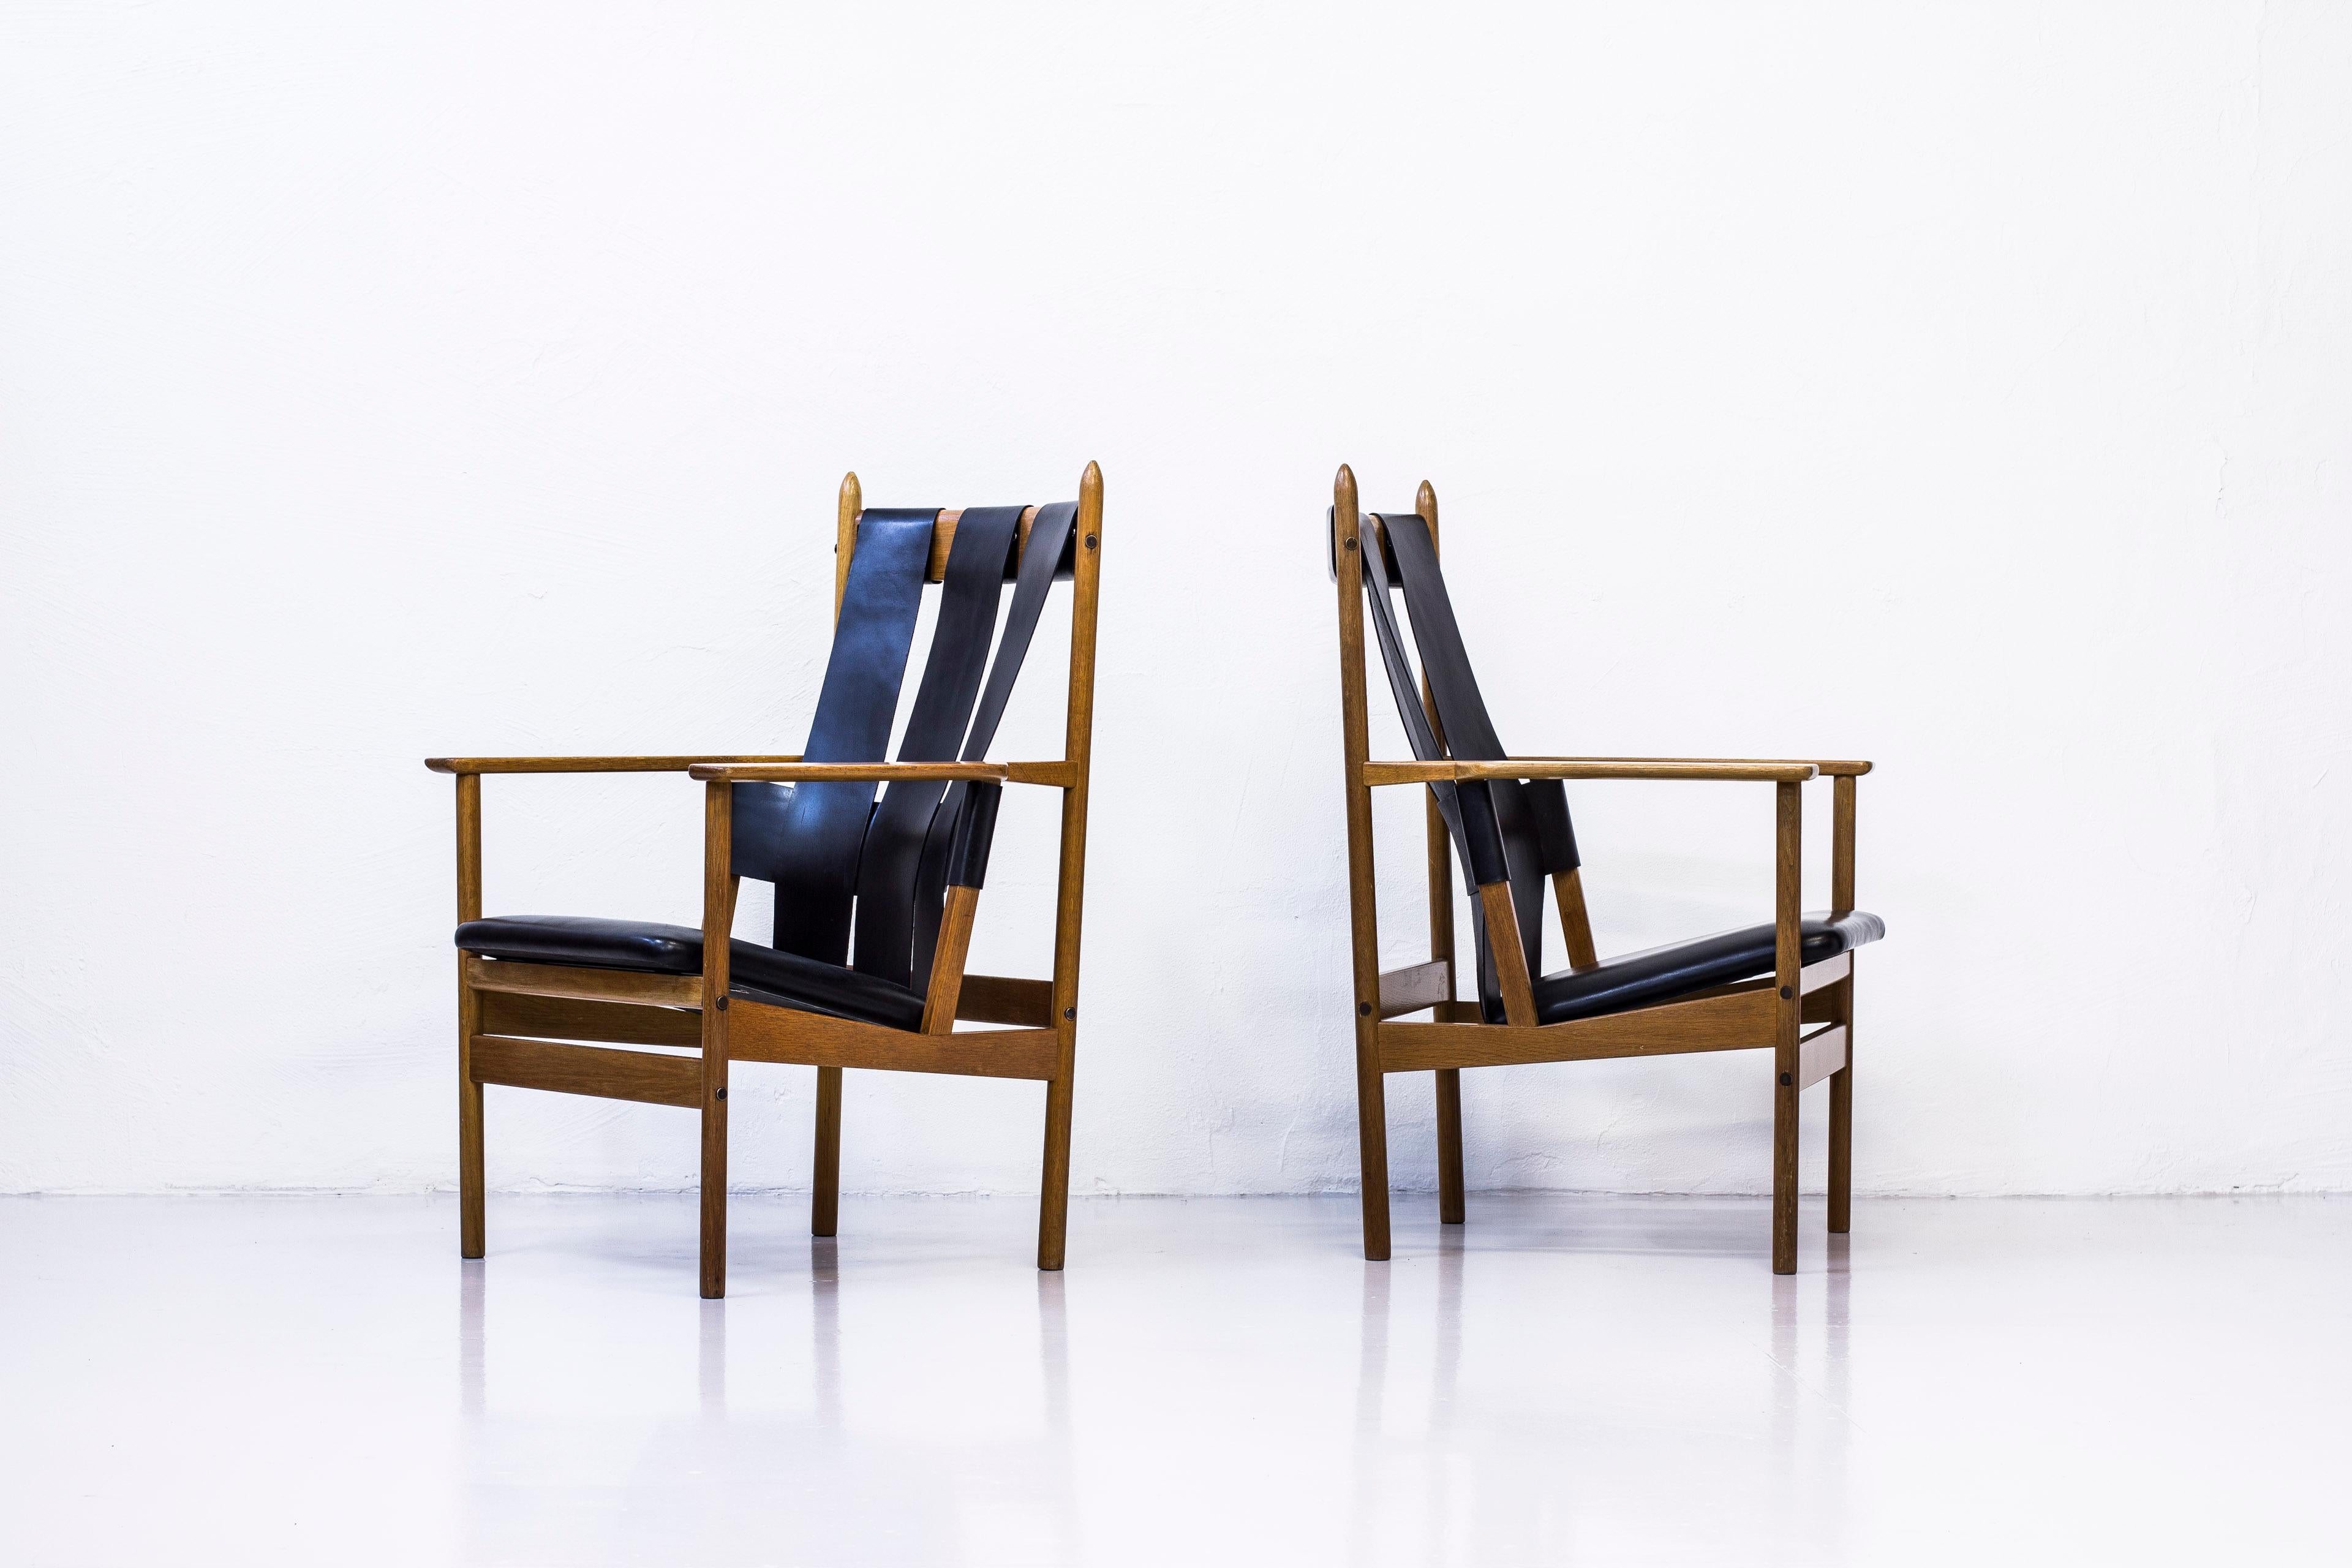 Rare pair of lounge chairs designed by Gunnar Eklöf. Produced in Sweden by Gärsnäs, in the 1950s. Made from solid oak with brass details and thick original hide and leather. Excellent condition with light wear and patina.